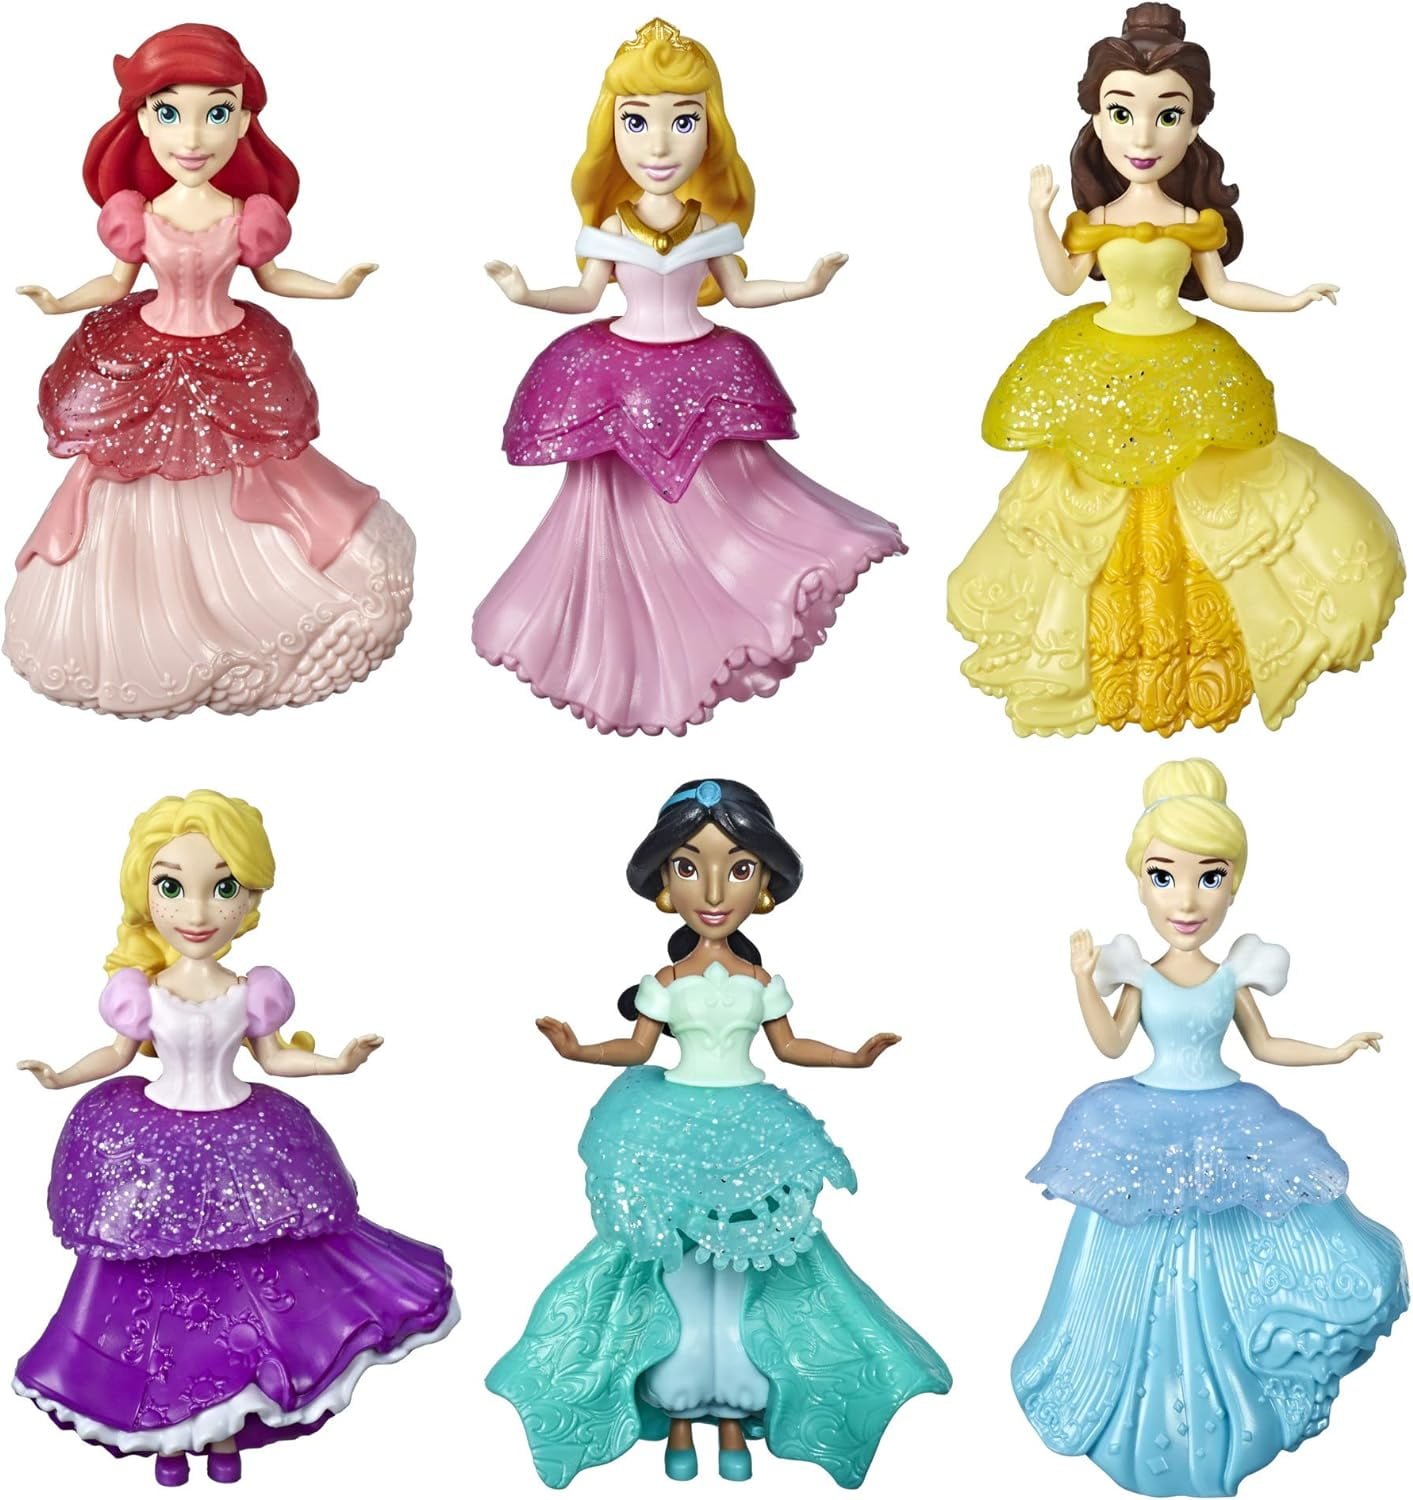 Disney Princess Collectible Dolls Set of 6 with 6 Royal Clips Fashions